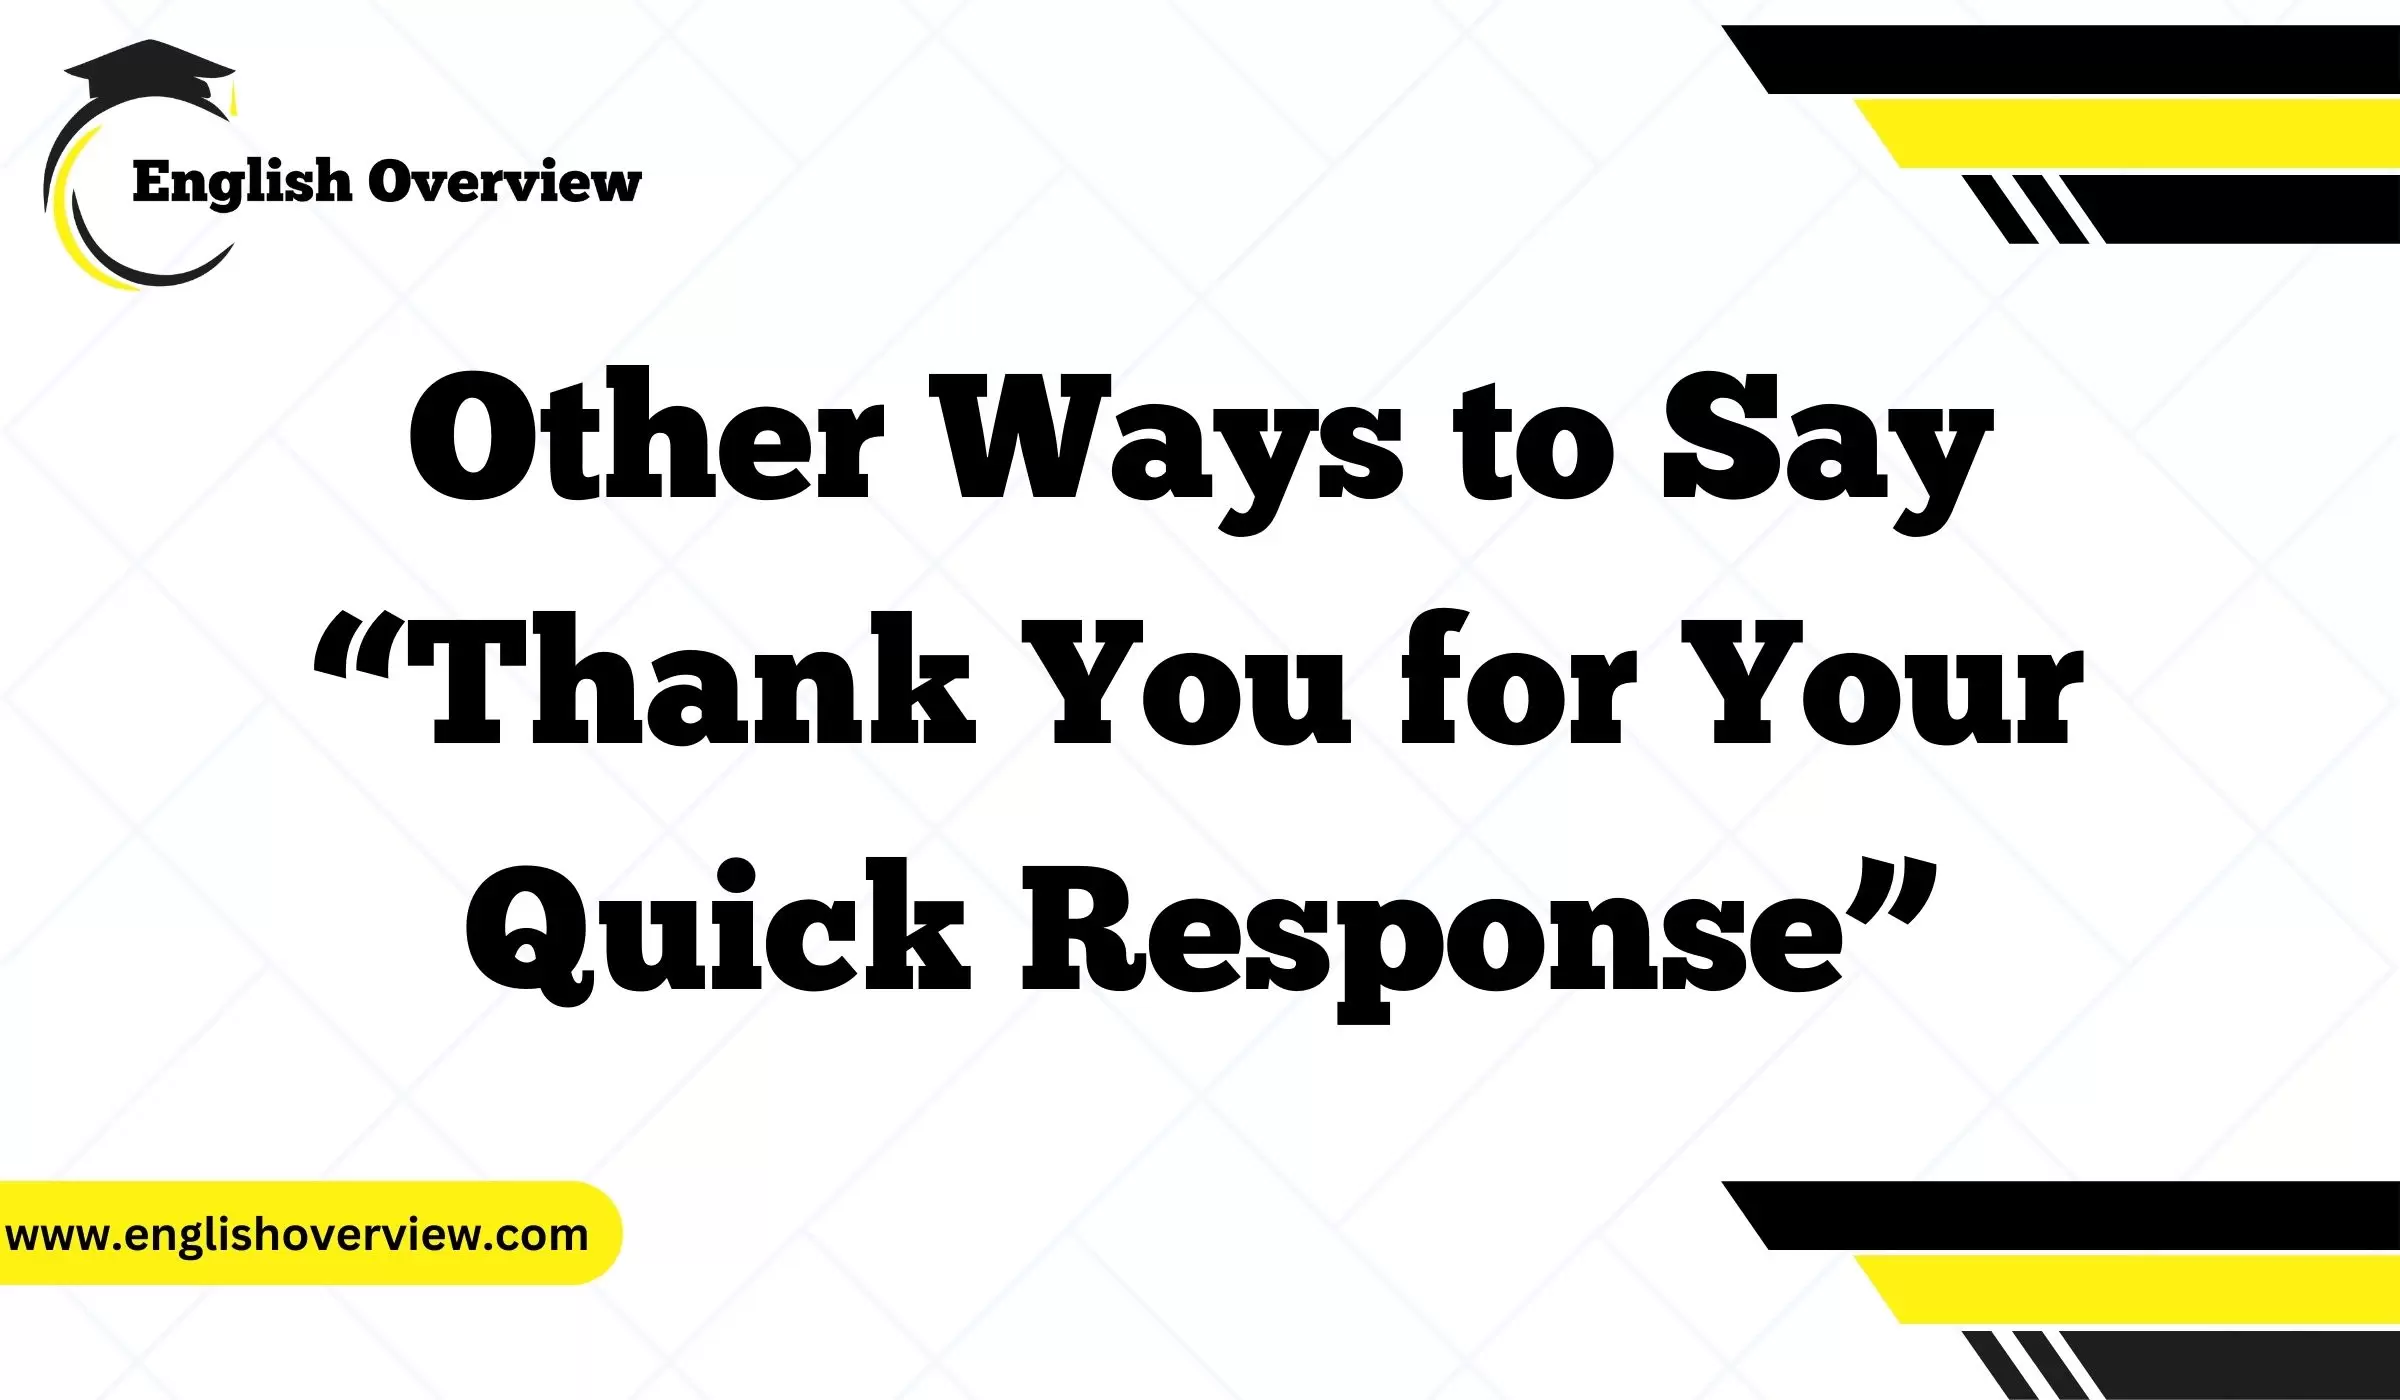 Other Ways to Say “Thank You for Your Quick Response”